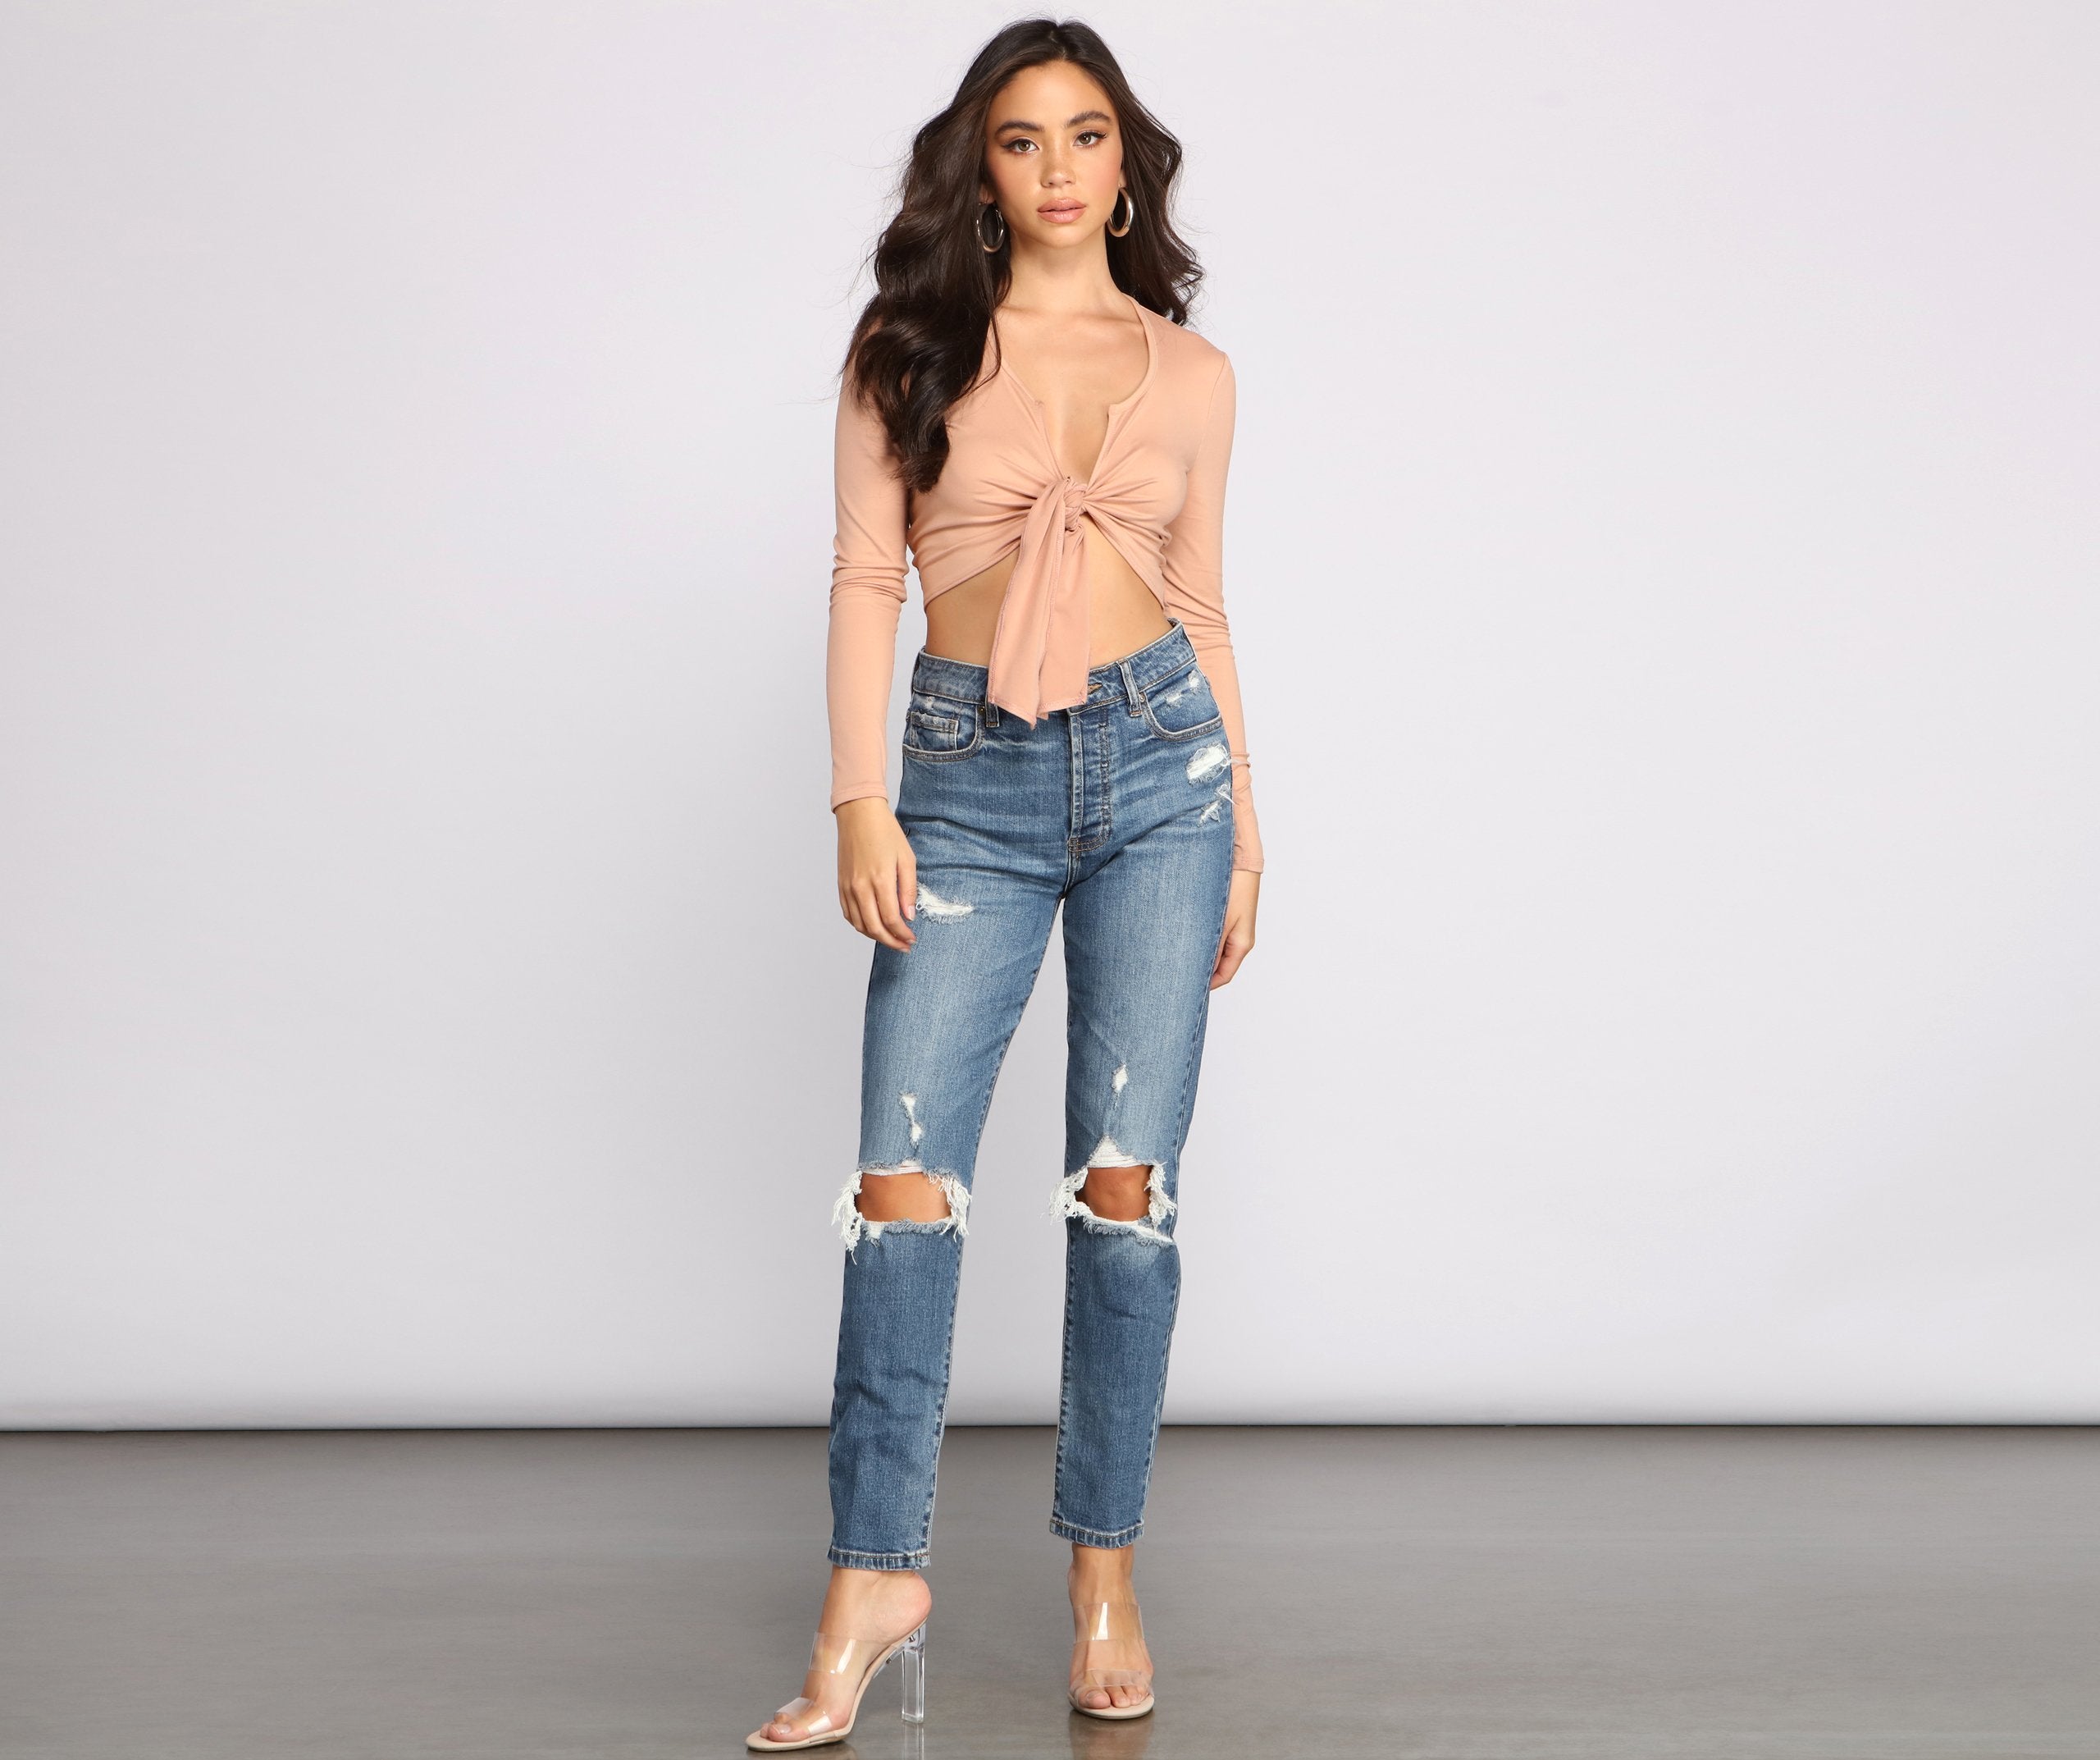 Falling For Basics Tie-Front Top - Lady Occasions